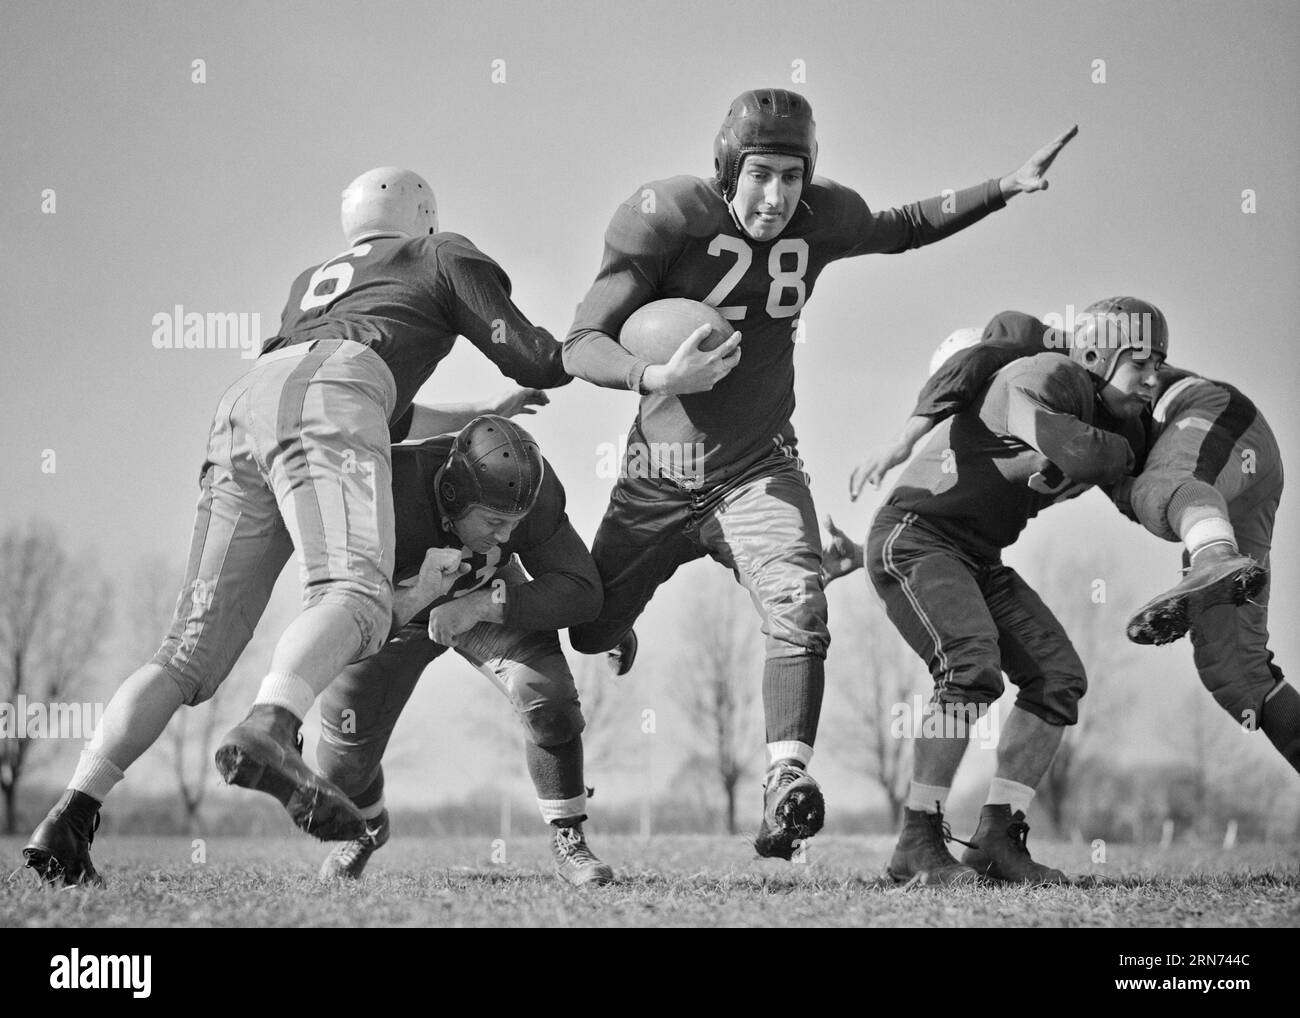 1940s FIVE 5 FOOTBALL PLAYERS ON FIELD A PLAYER CARRYING THE BALL GETTING THROUGH FREE AND CLEAR BETWEEN TACKLERS BEING BLOCKED - f2486 HAR001 HARS GET PLAYERS B&W GOALS ADVENTURE PROTECTION STRATEGY UNIVERSITIES AND EXCITEMENT LOW ANGLE RECREATION DIRECTION A ON OPPORTUNITY THE BETWEEN FREE UNIFORMS MADE BLOCKED CONCEPTUAL ATHLETES ESCAPE SUPPORT COLLEGES TACKLES CLEAR COLLEGIATE COOPERATION FOOTBALLS TEAMS YOUNG ADULT MAN AMERICAN FOOTBALL BLACK AND WHITE HAR001 OLD FASHIONED Stock Photo